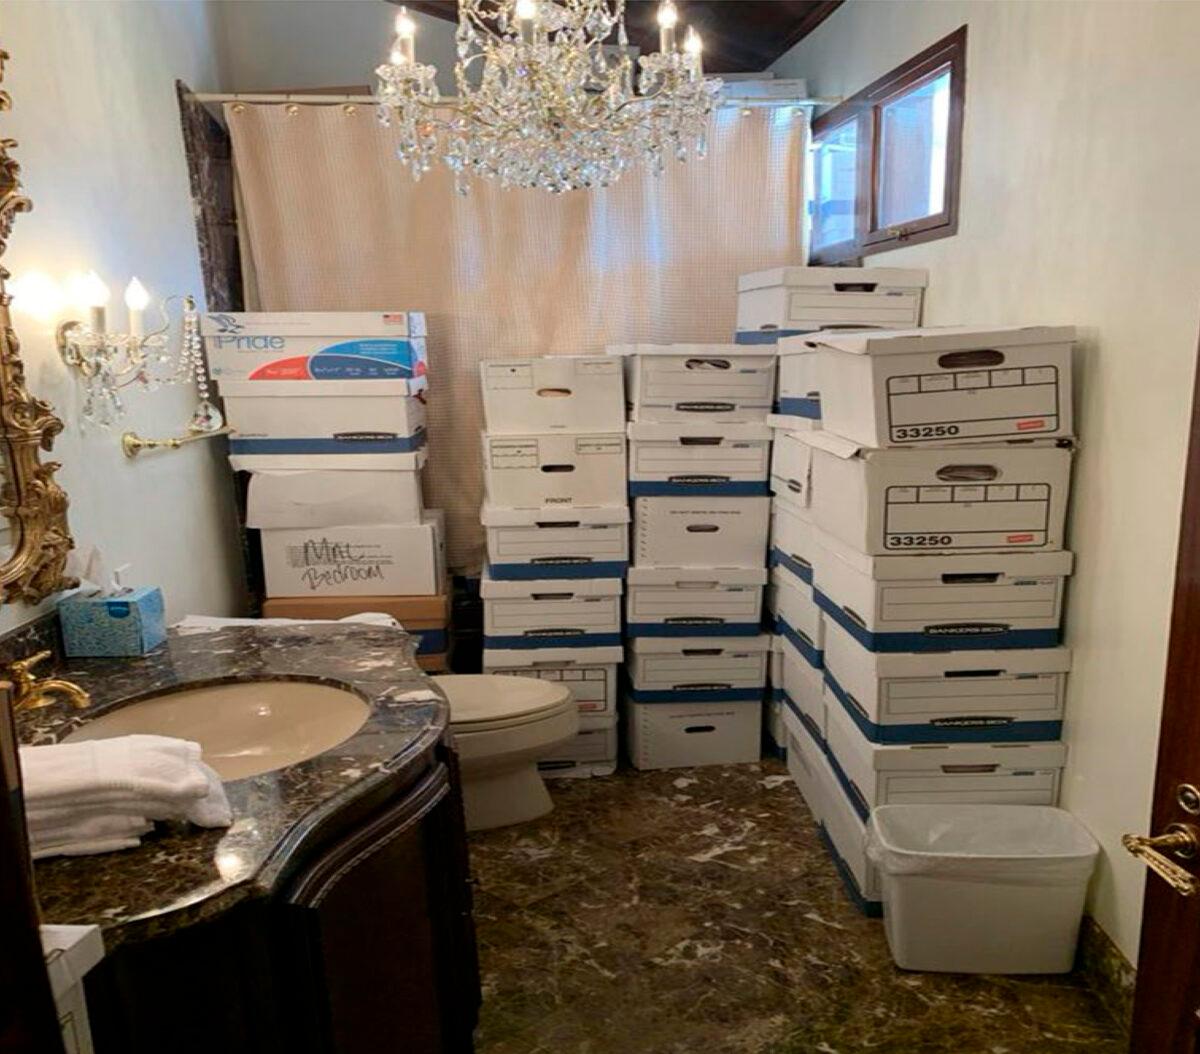 Boxes of records are stored in a bathroom at Trump's Mar-a-Lago estate in Palm Beach, Fla. (Department of Justice via AP)